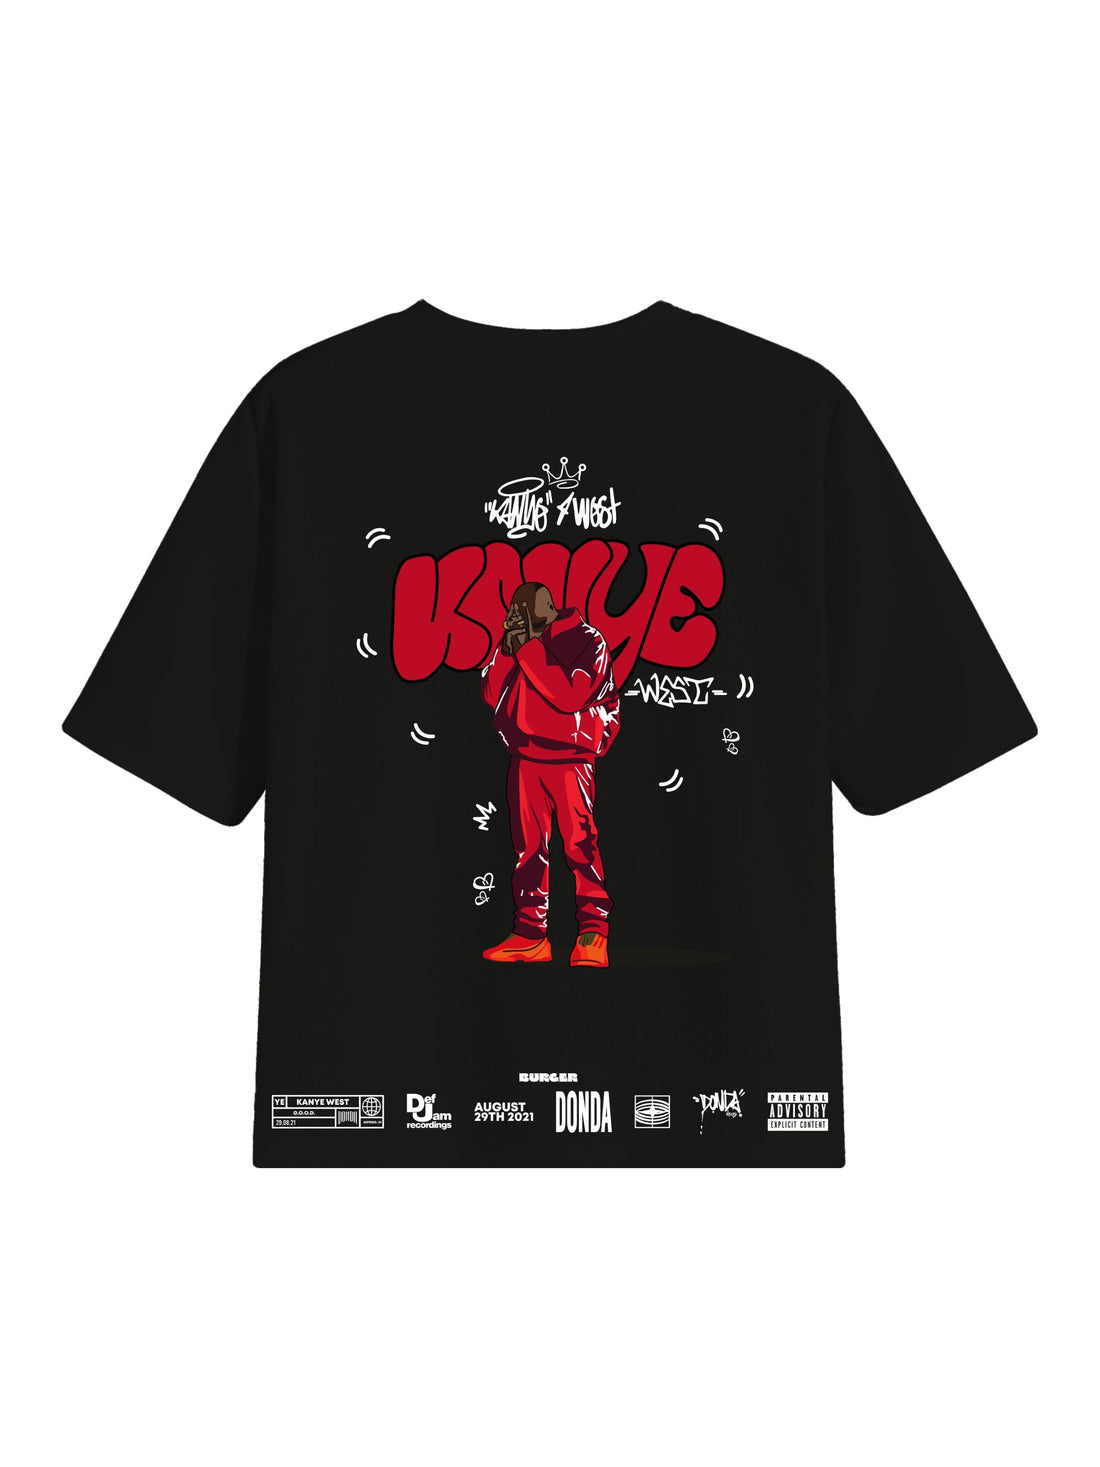 The Kanye West : Donda Cartoon art Drop Sleeved Tee for Men and Women